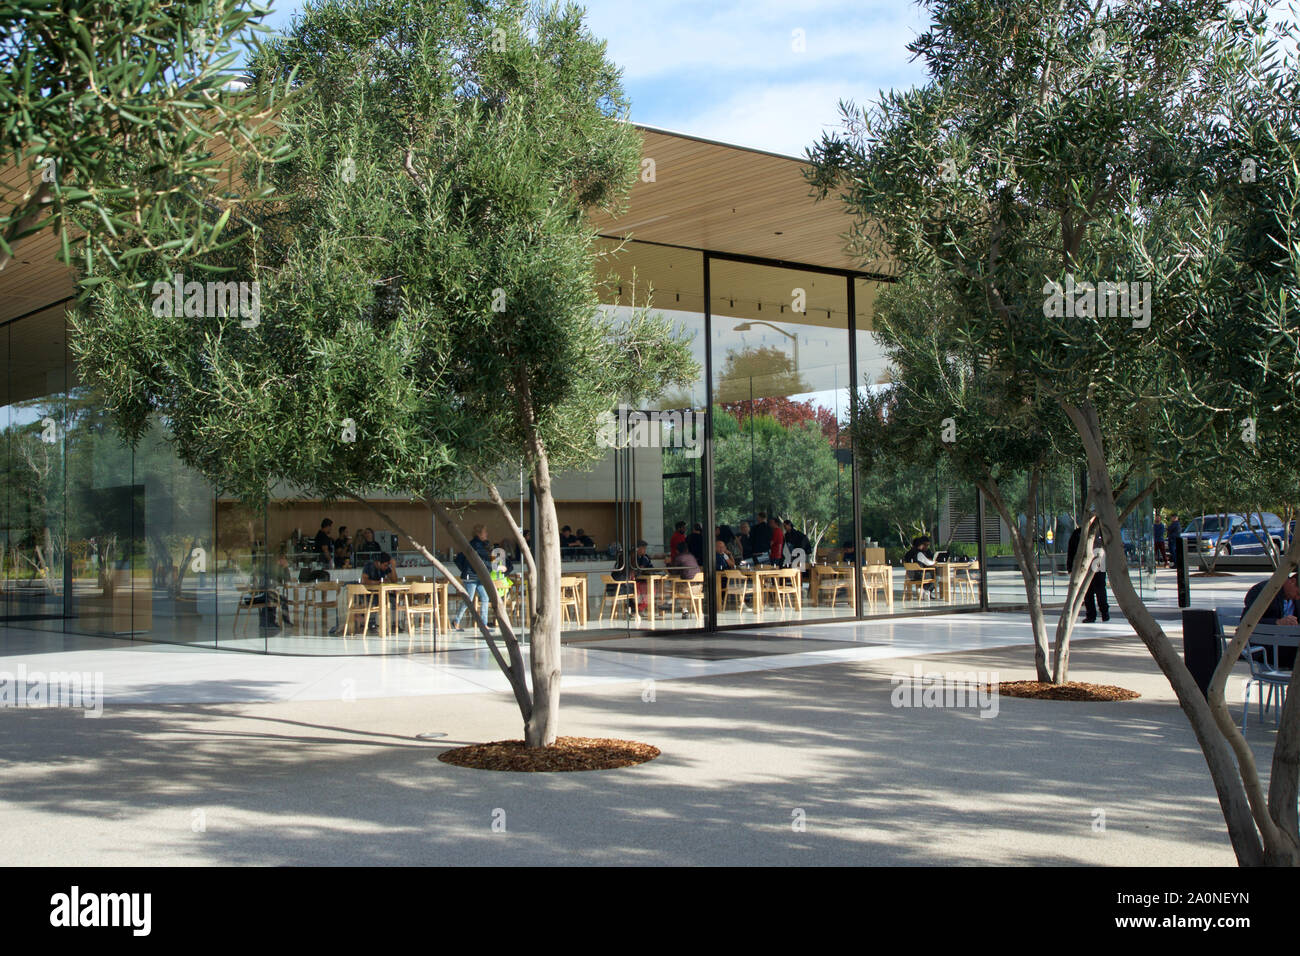 CUPERTINO, CALIFORNIA, UNITED STATES - NOV 26th, 2018: Exterior view of the new and modern Apple Park visitor center located next to their new Stock Photo